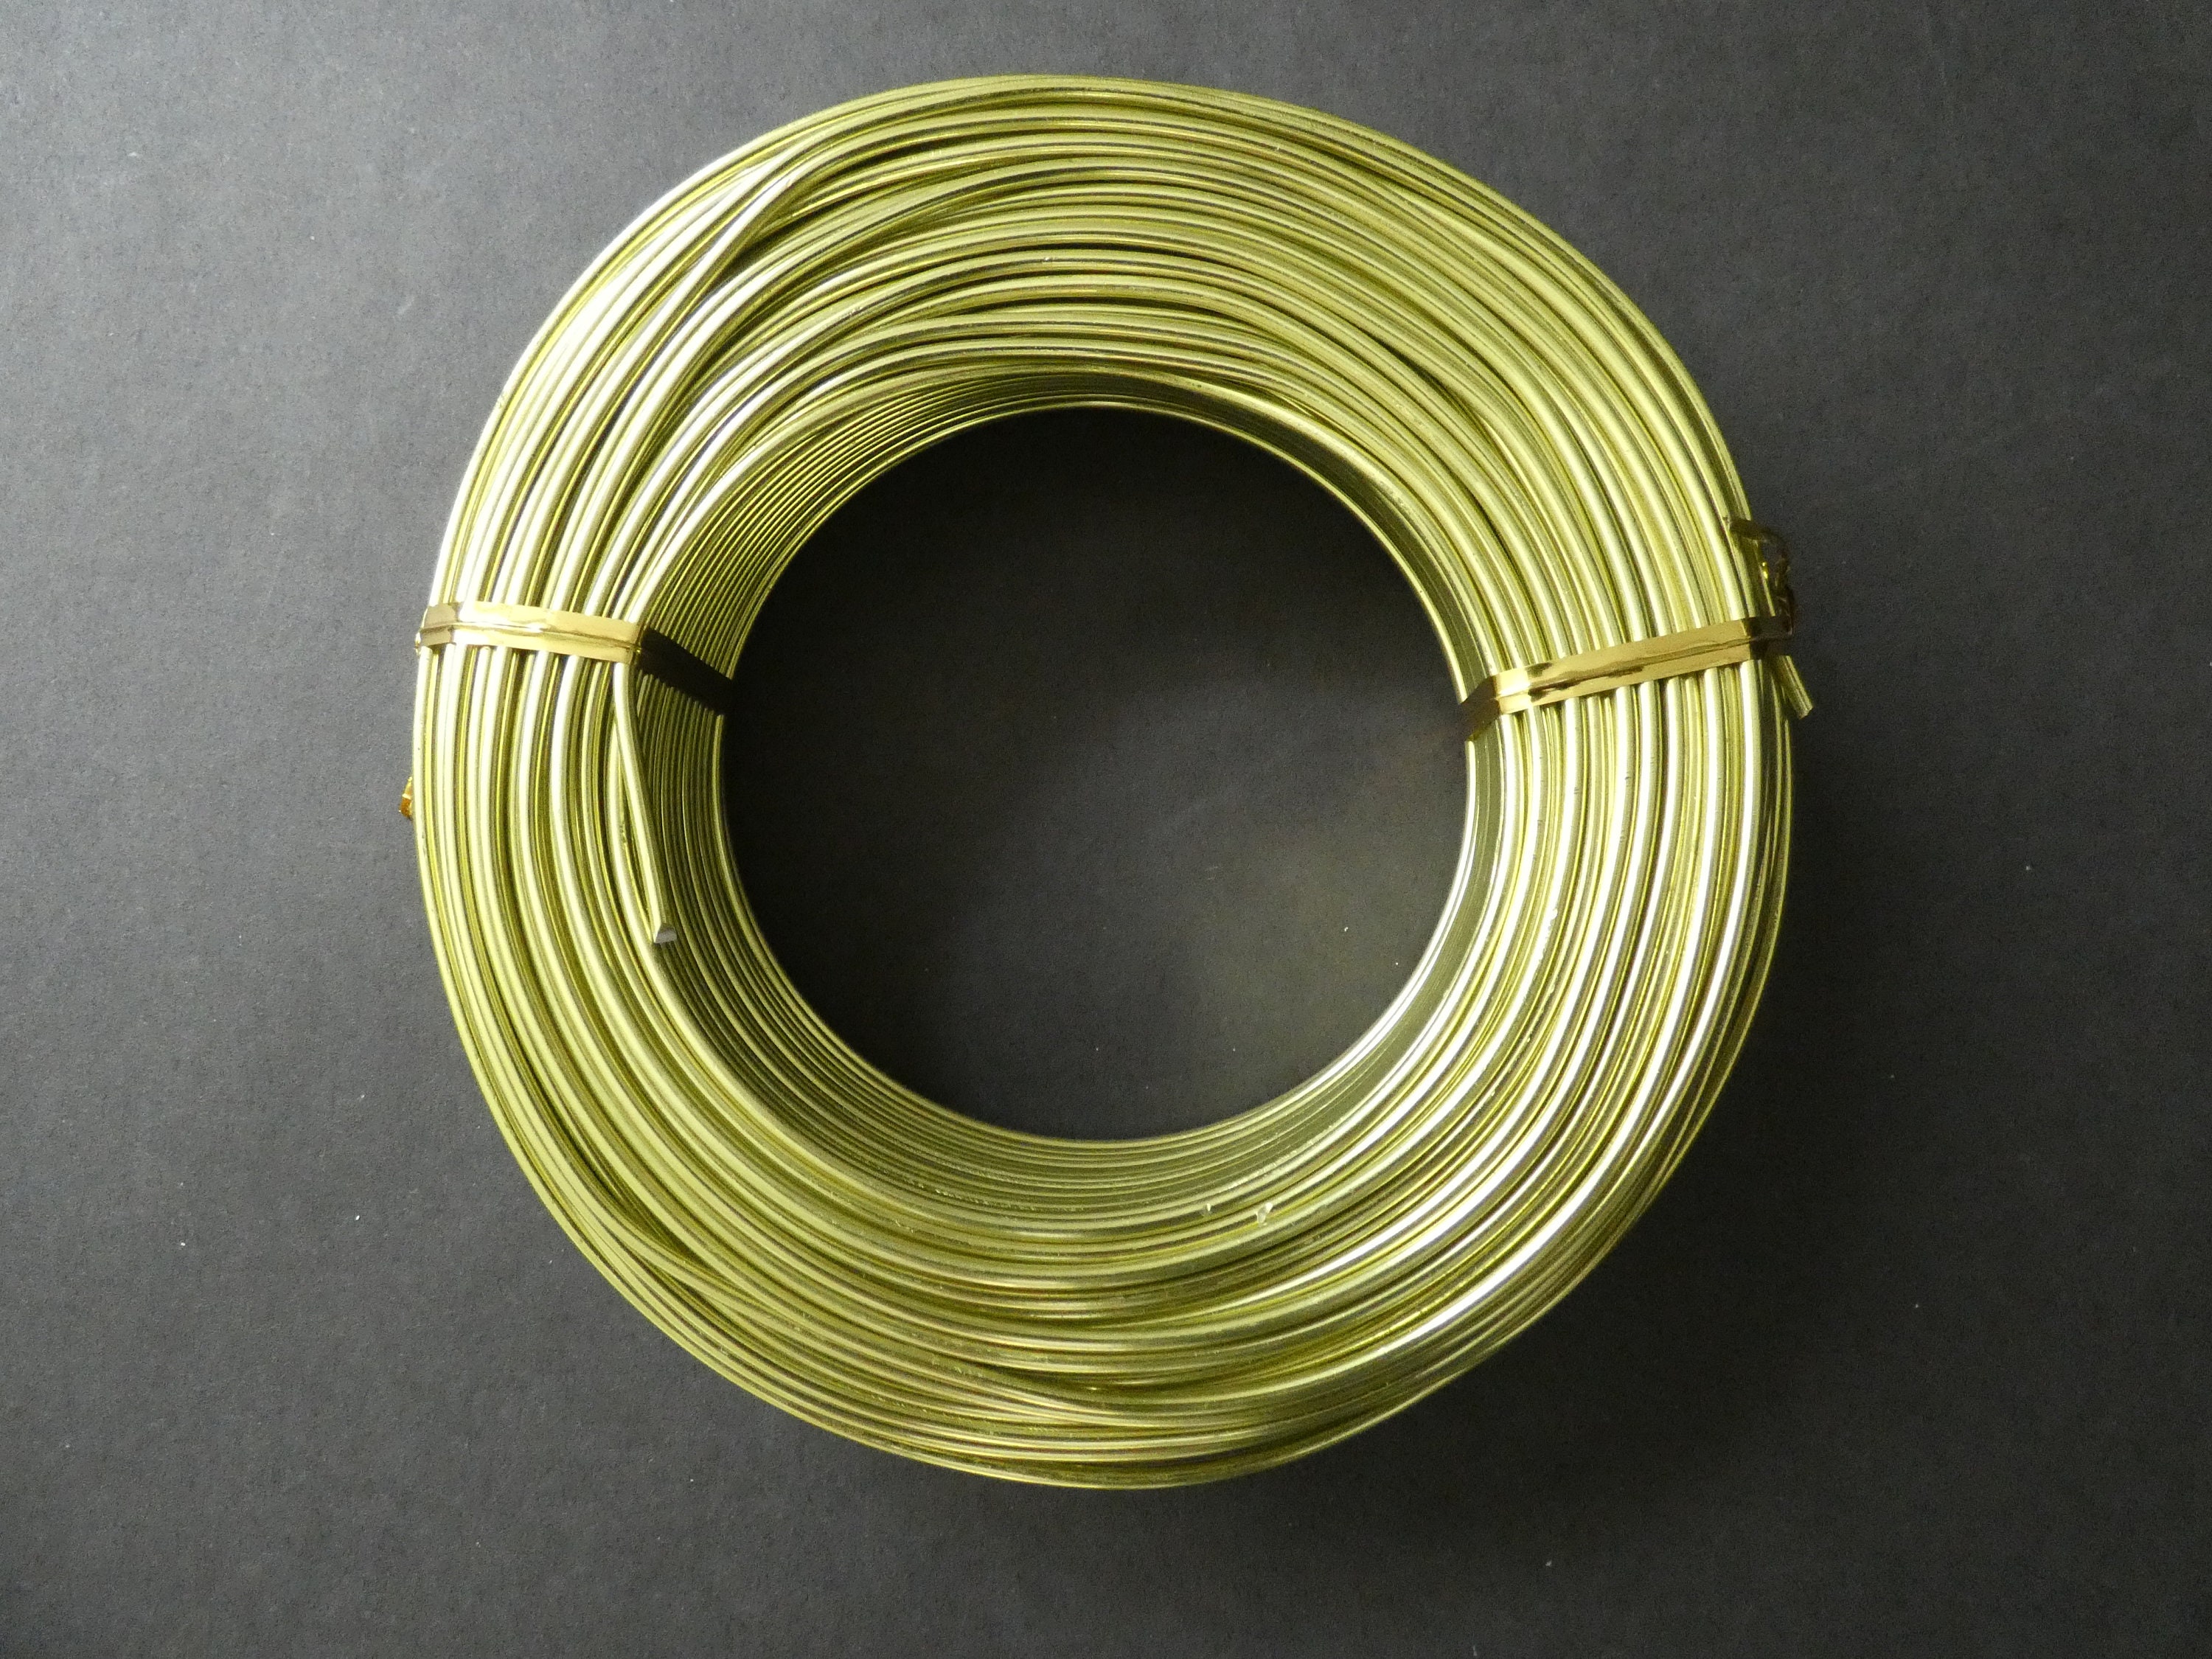 55 Meters Of 2mm Green Yellow Aluminum Jewelry Wire, 2mm Diameter, 500  Grams Beading Wire, Yellow Metal Wire, Jewelry Making & Wire Wrapping